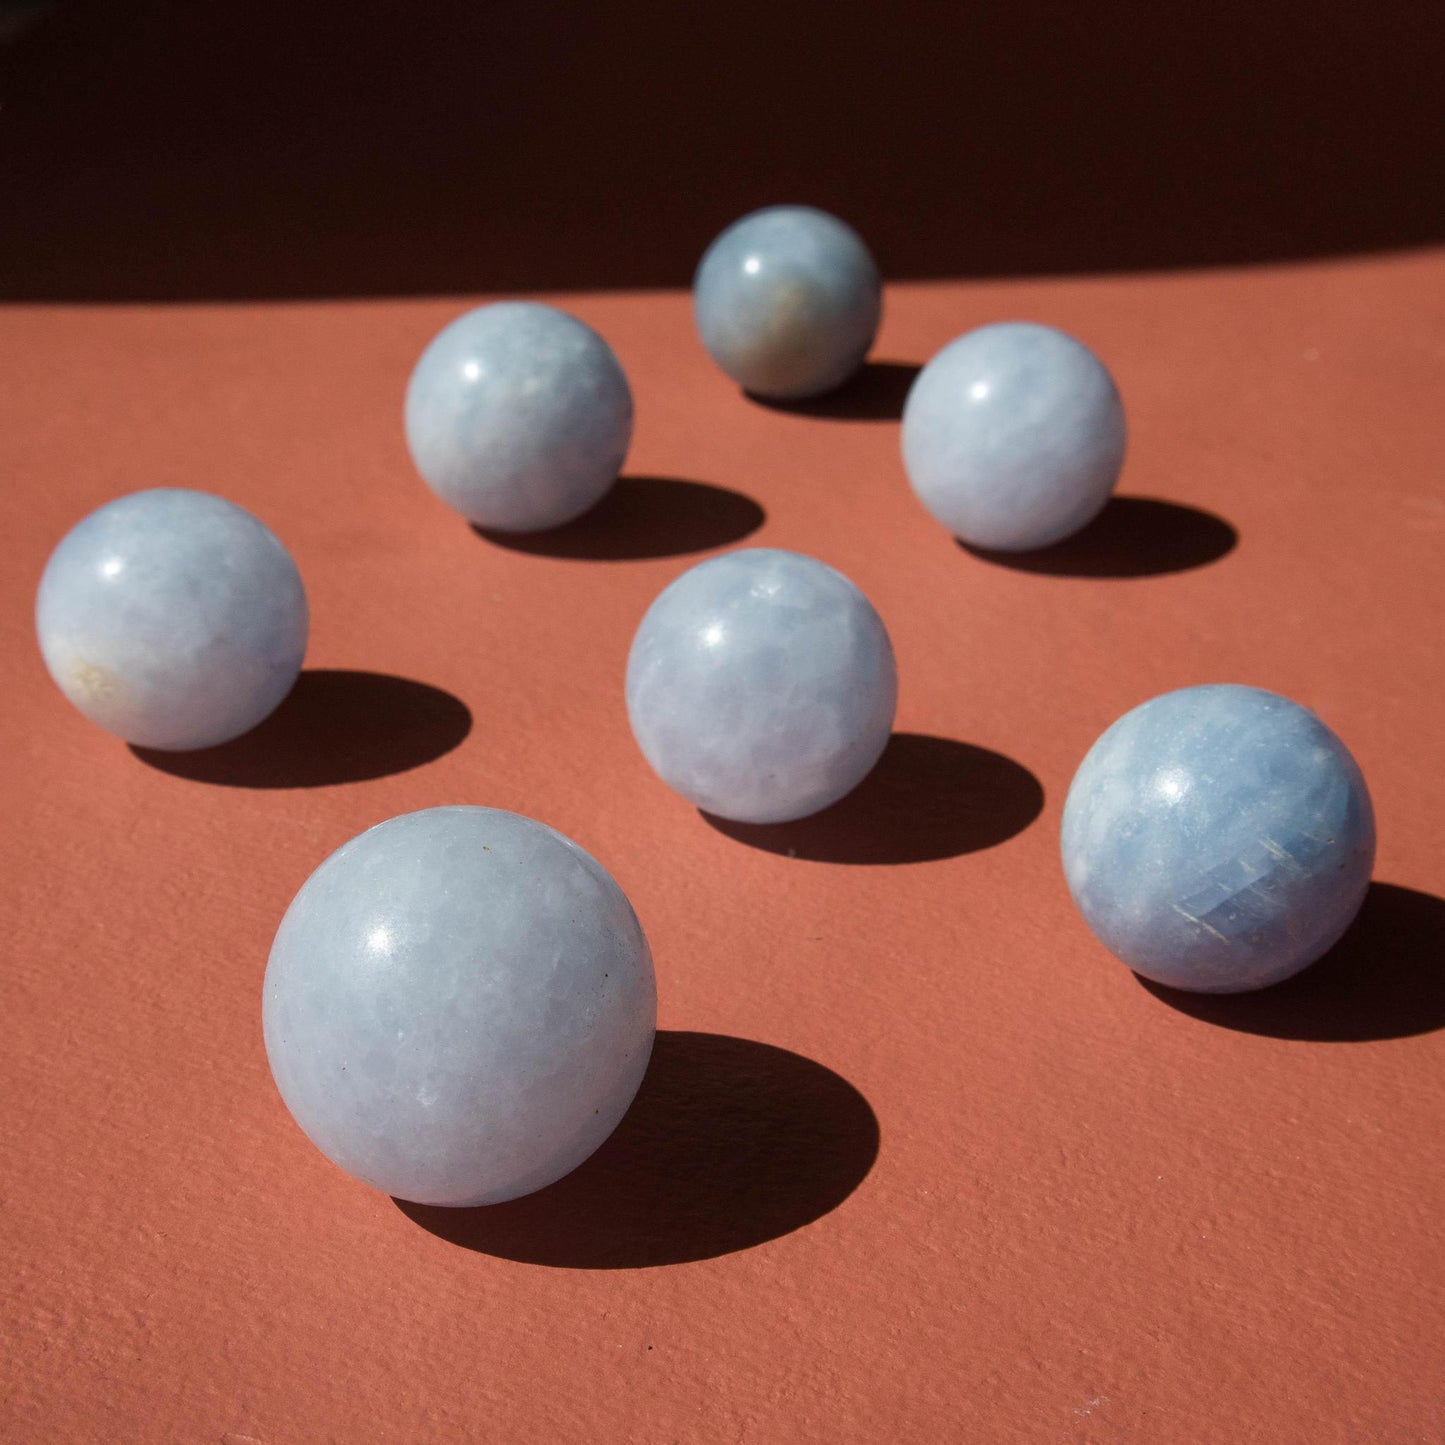 blue calcite, blue calcite sphere, crystal sphere, blue calcite crystal, blue calcite stone, blue calcite properties, blue calcite healing properties, blue calcite metaphysical properties, blue calcite meaning 